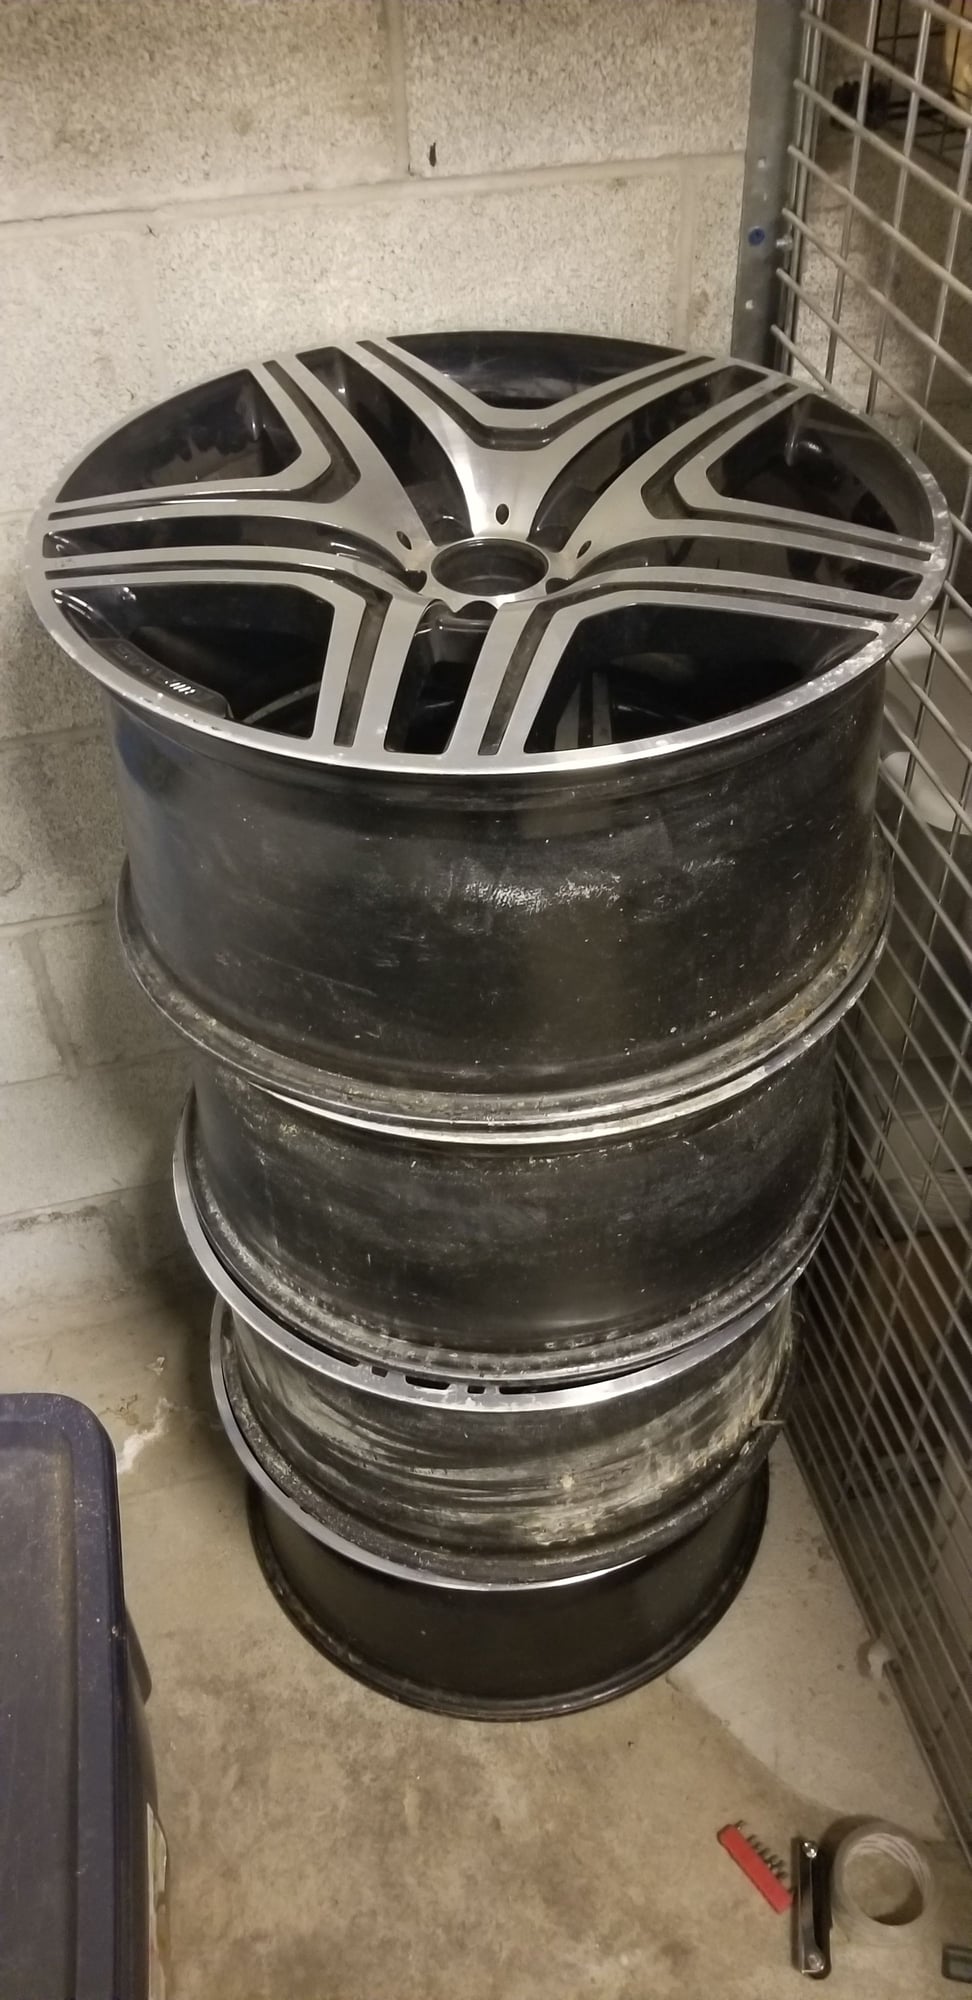 Wheels and Tires/Axles - Factory AMG 21" Wheels (4) GL GLS - Used - 2010 to 2020 Mercedes-Benz All Models - Chicago, IL 60607, United States